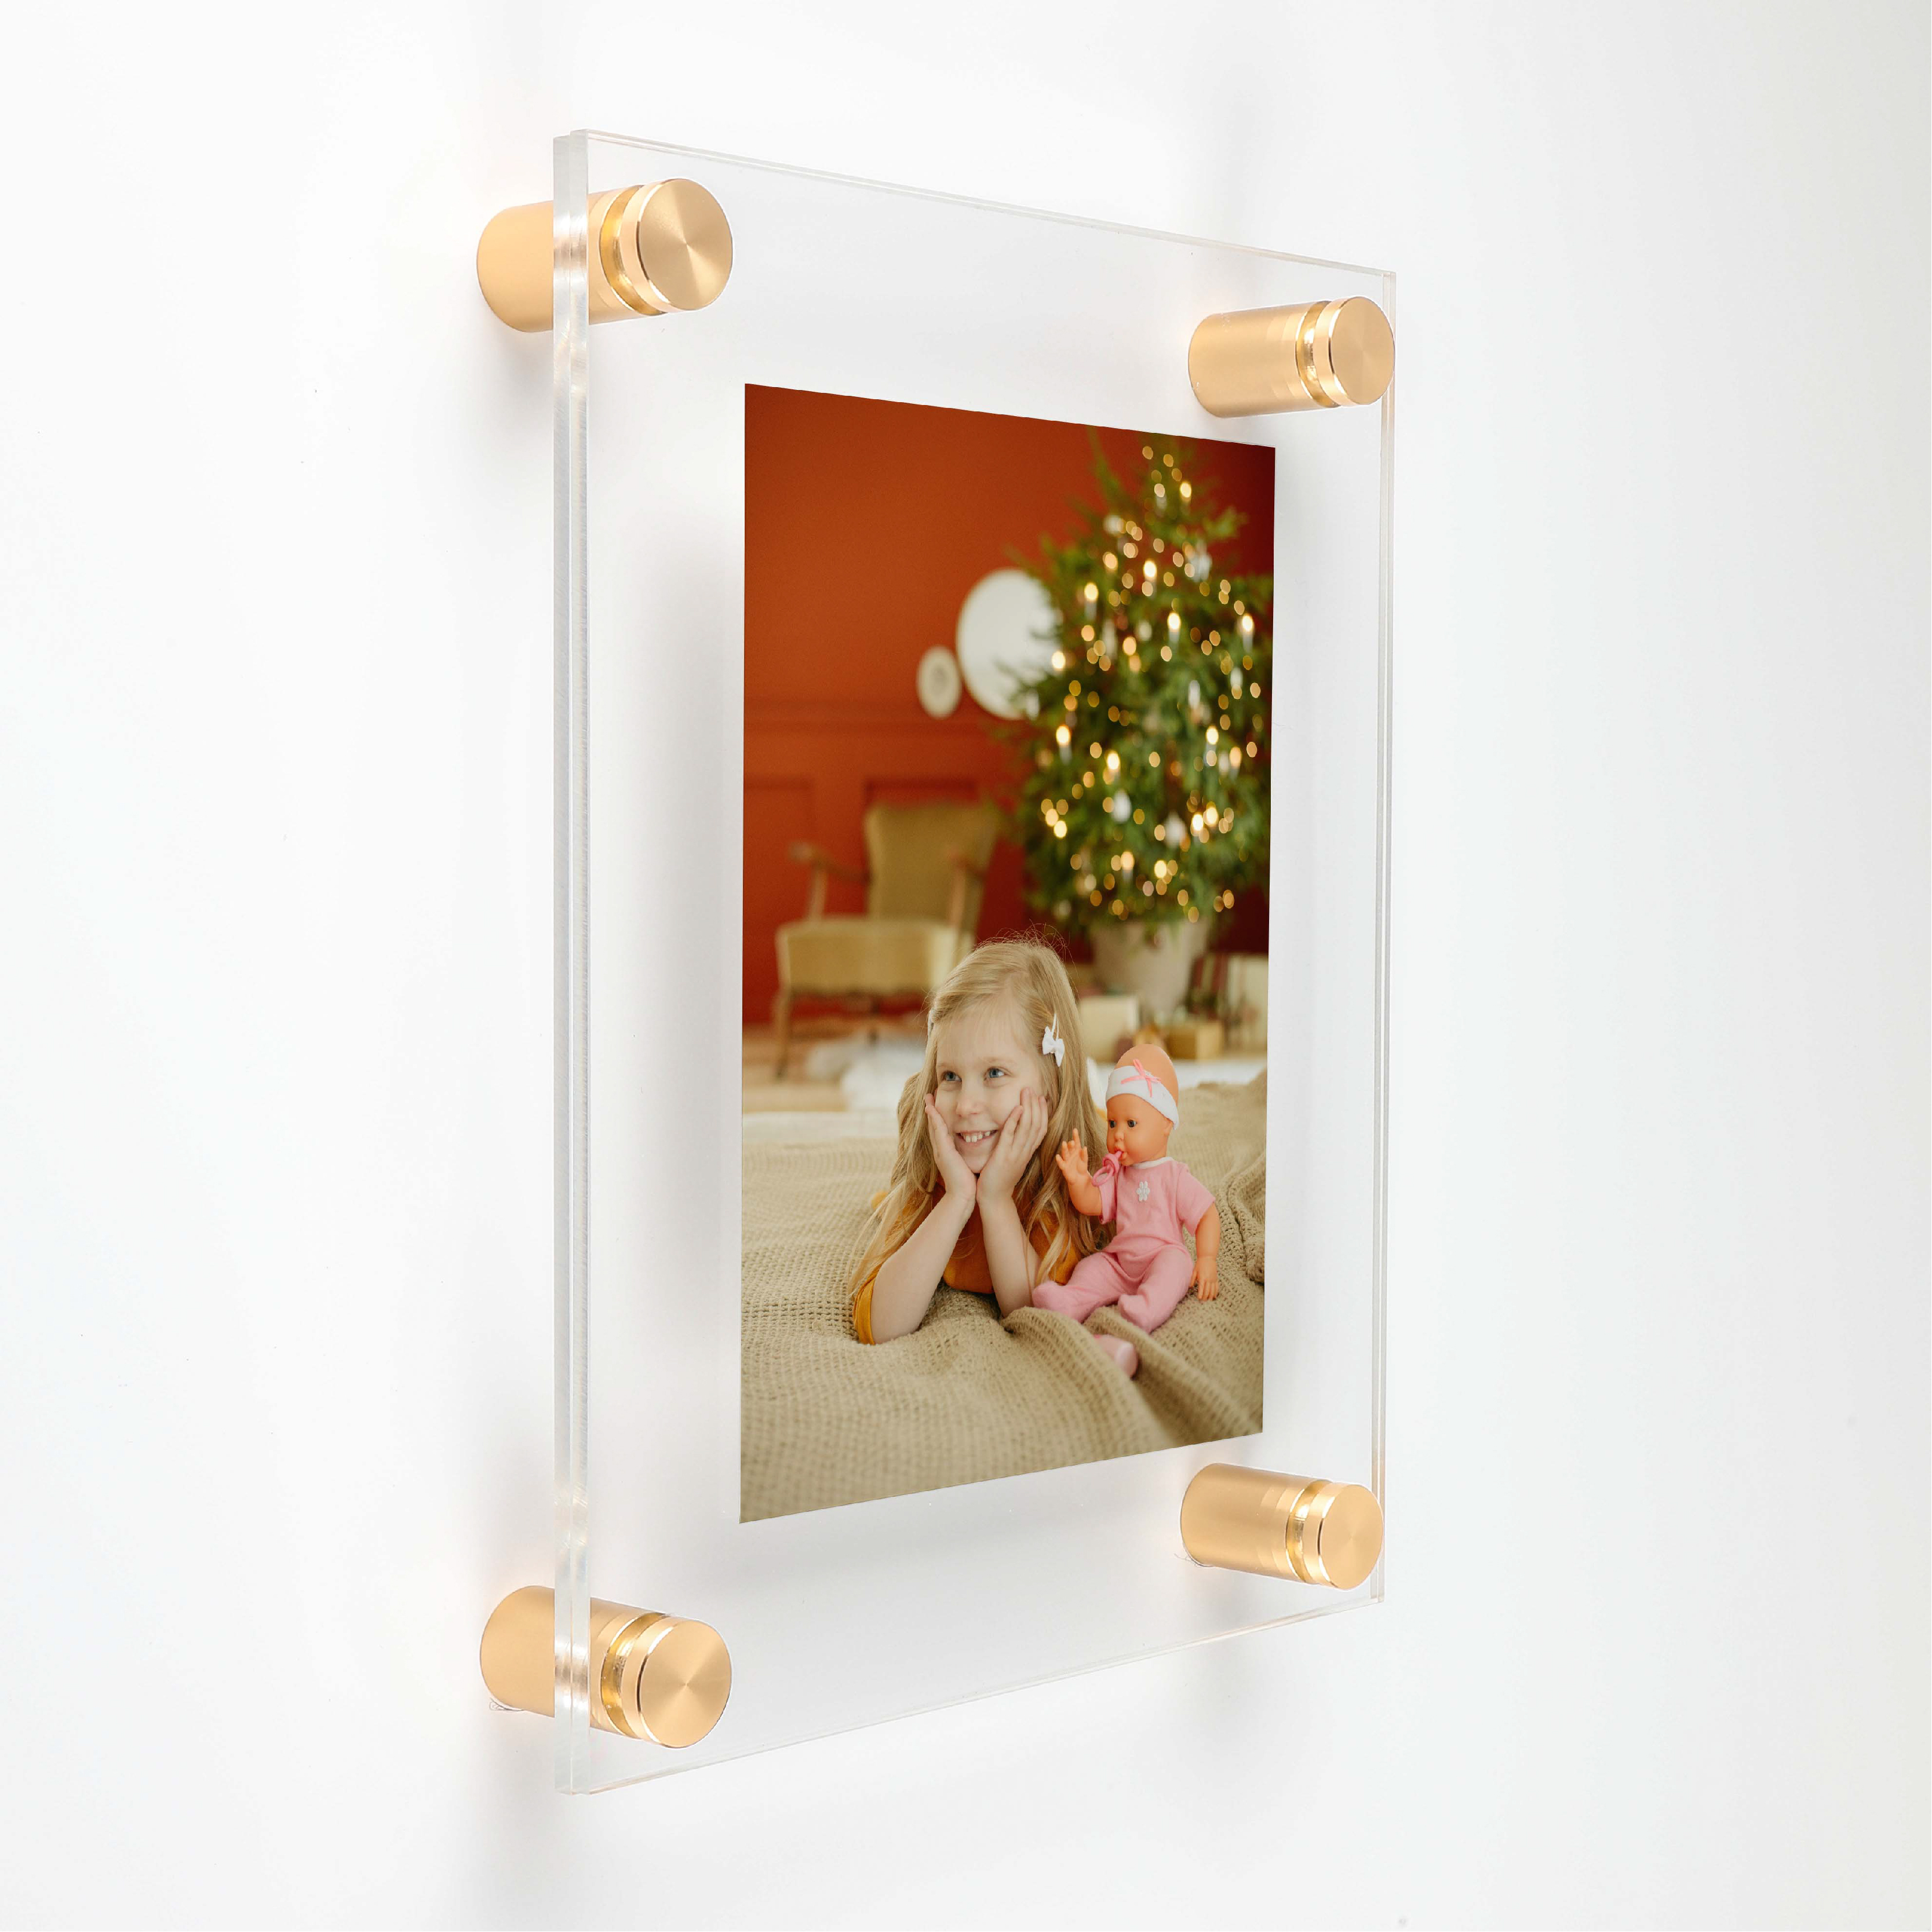 (2) 13-1/2'' x 16-1/2'' Clear Acrylics , Pre-Drilled With Polished Edges (Thick 1/8'' each), Wall Frame with (4) 3/4'' x 1'' Champagne Anodized Aluminum Standoffs includes Screws and Anchors